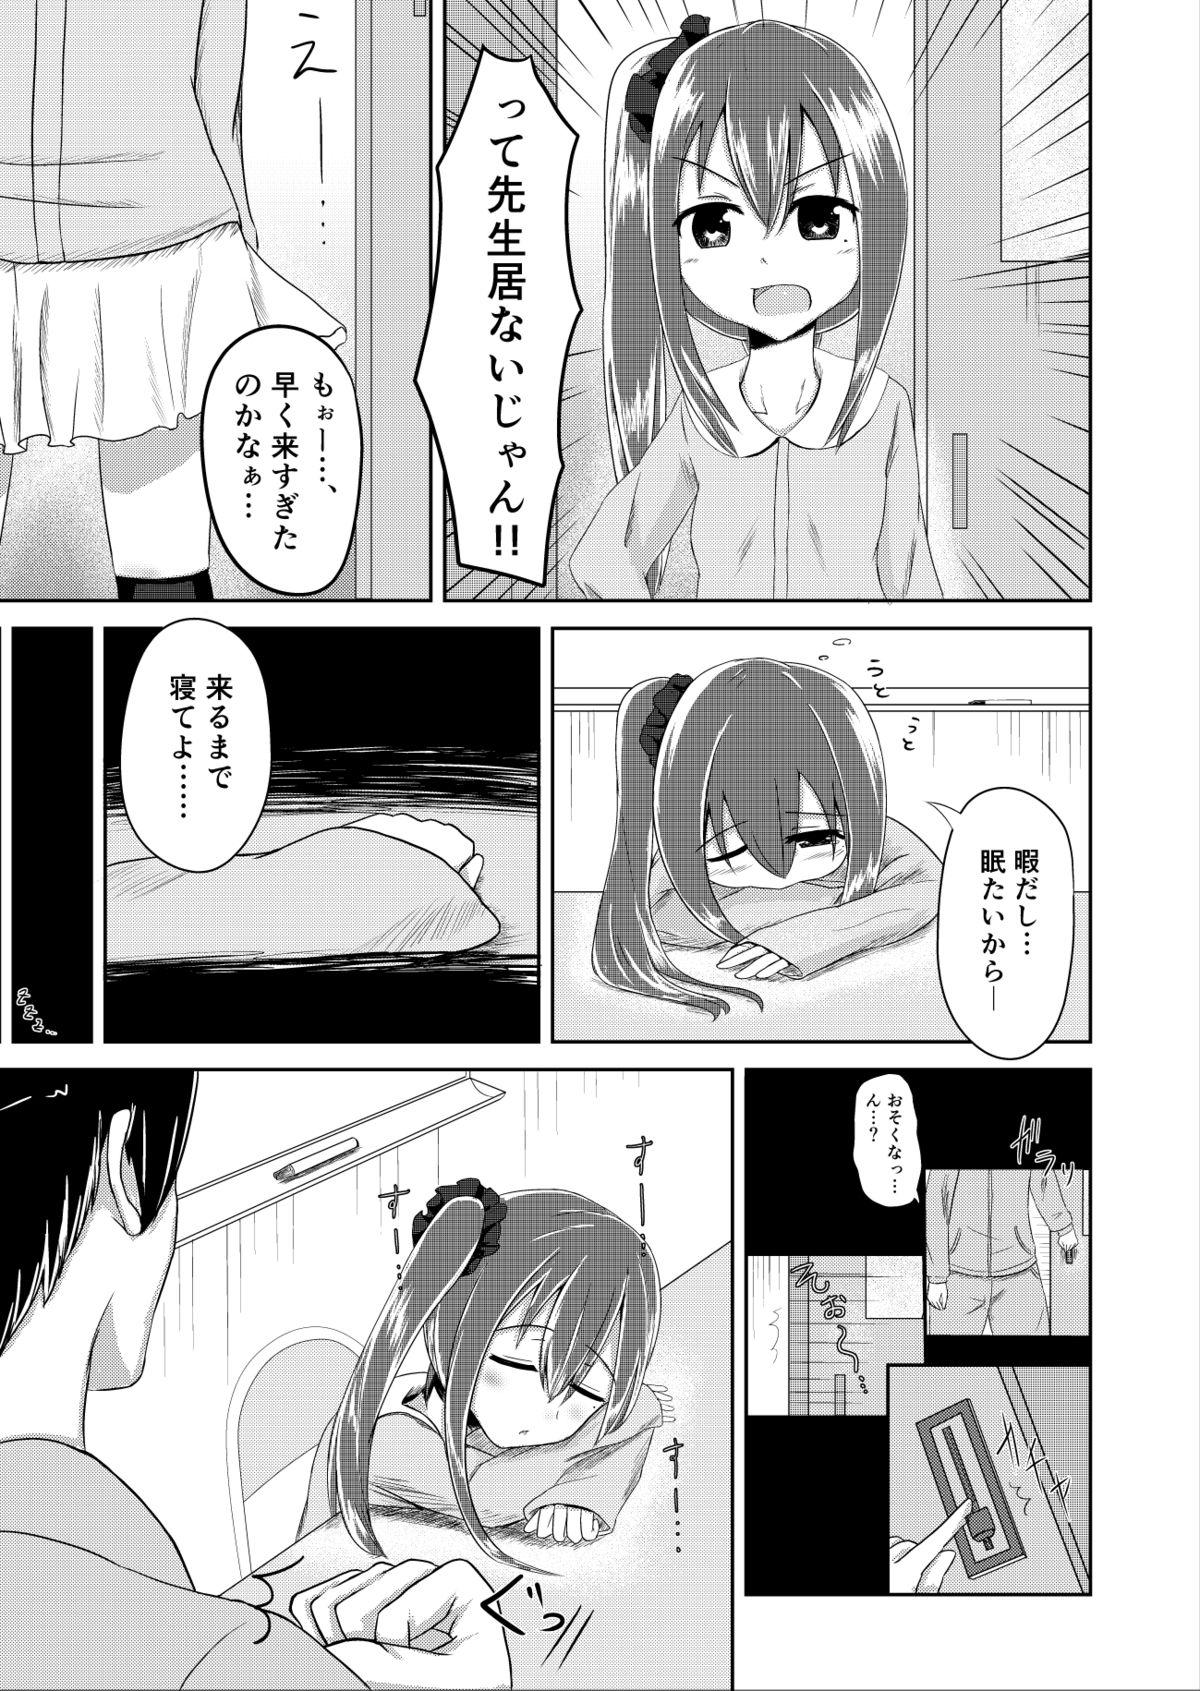 Brother Sister [Rorioiru] 夕方の(Hな)友達 Foreplay - Page 3